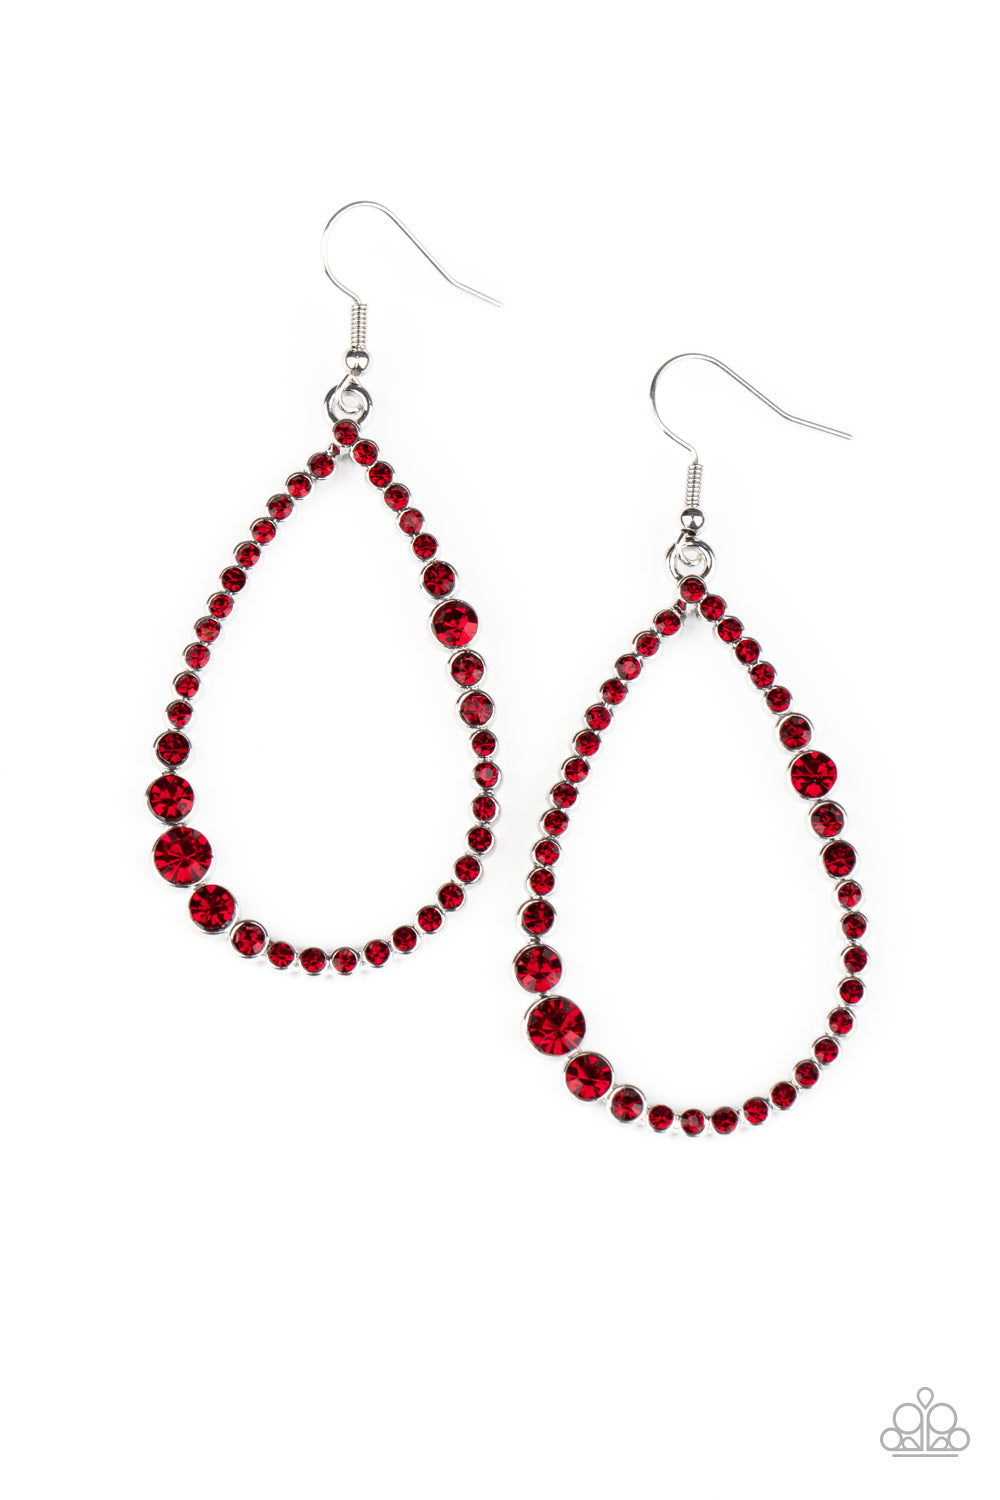 Paparazzi Earrings - Diva Dimension - Red